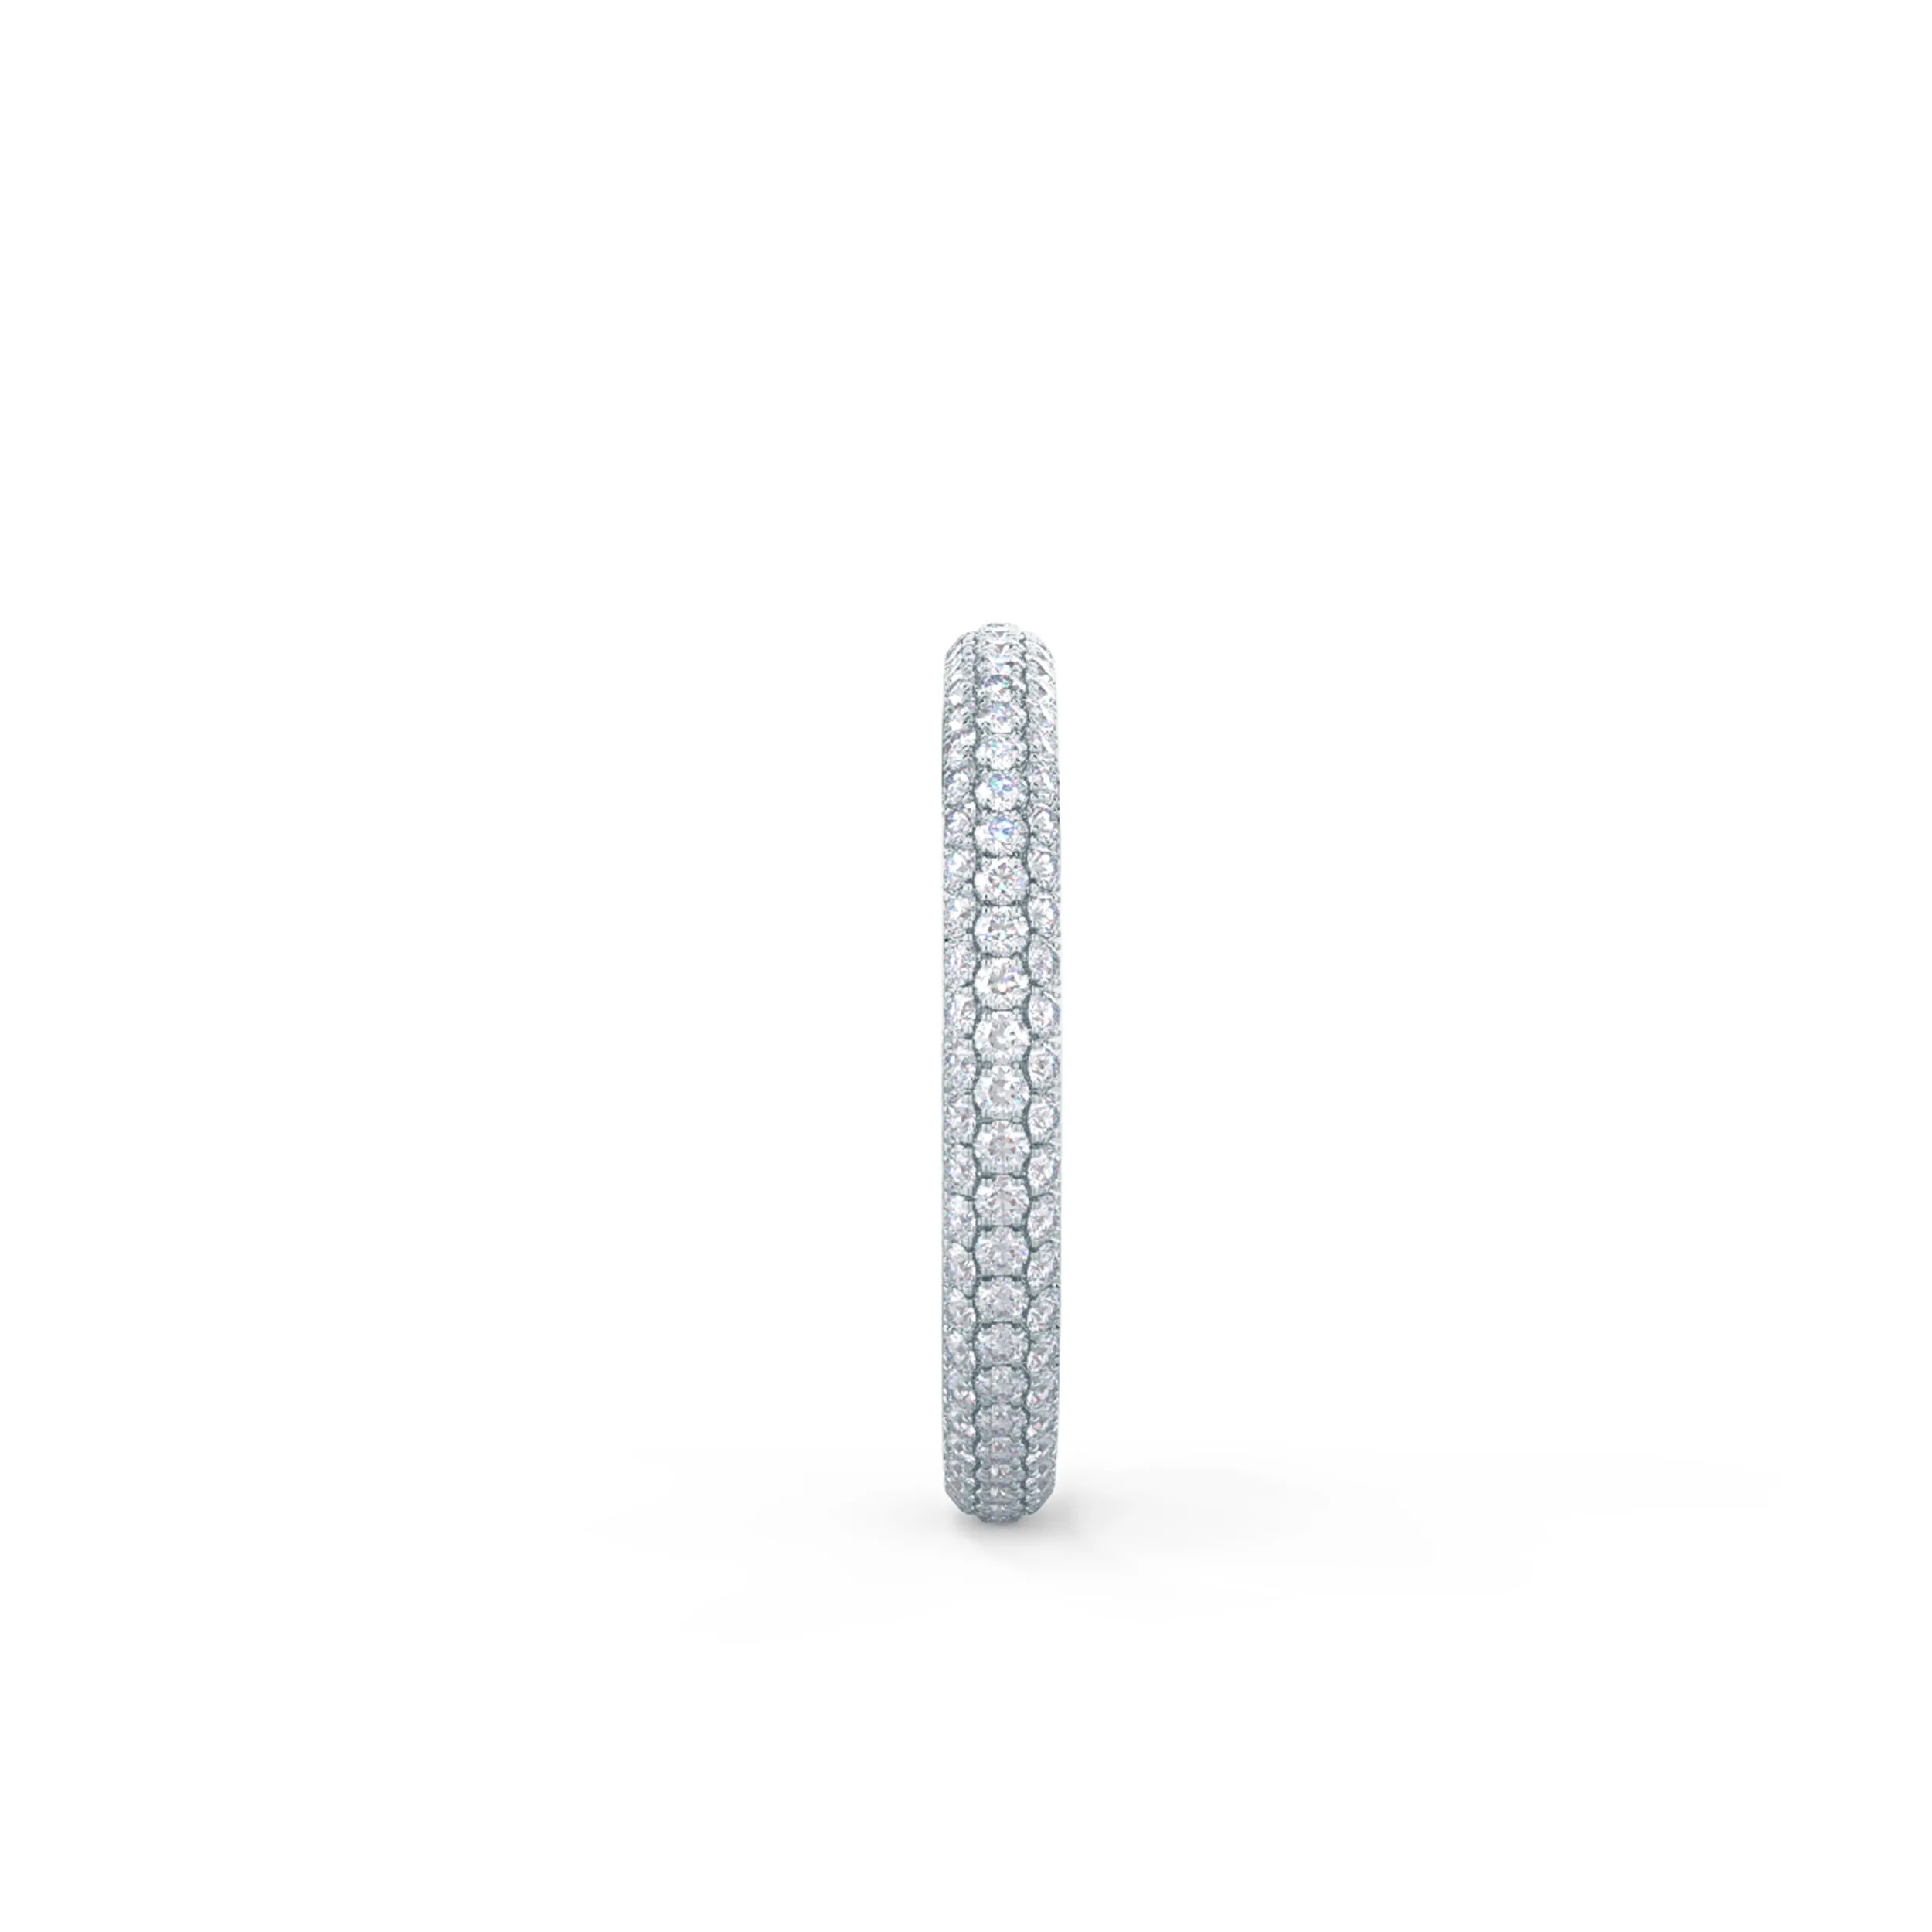 0.8 Carat Round Brilliant Diamonds set in 18k White Gold Three Sided Pavé Eternity Band (Side View)